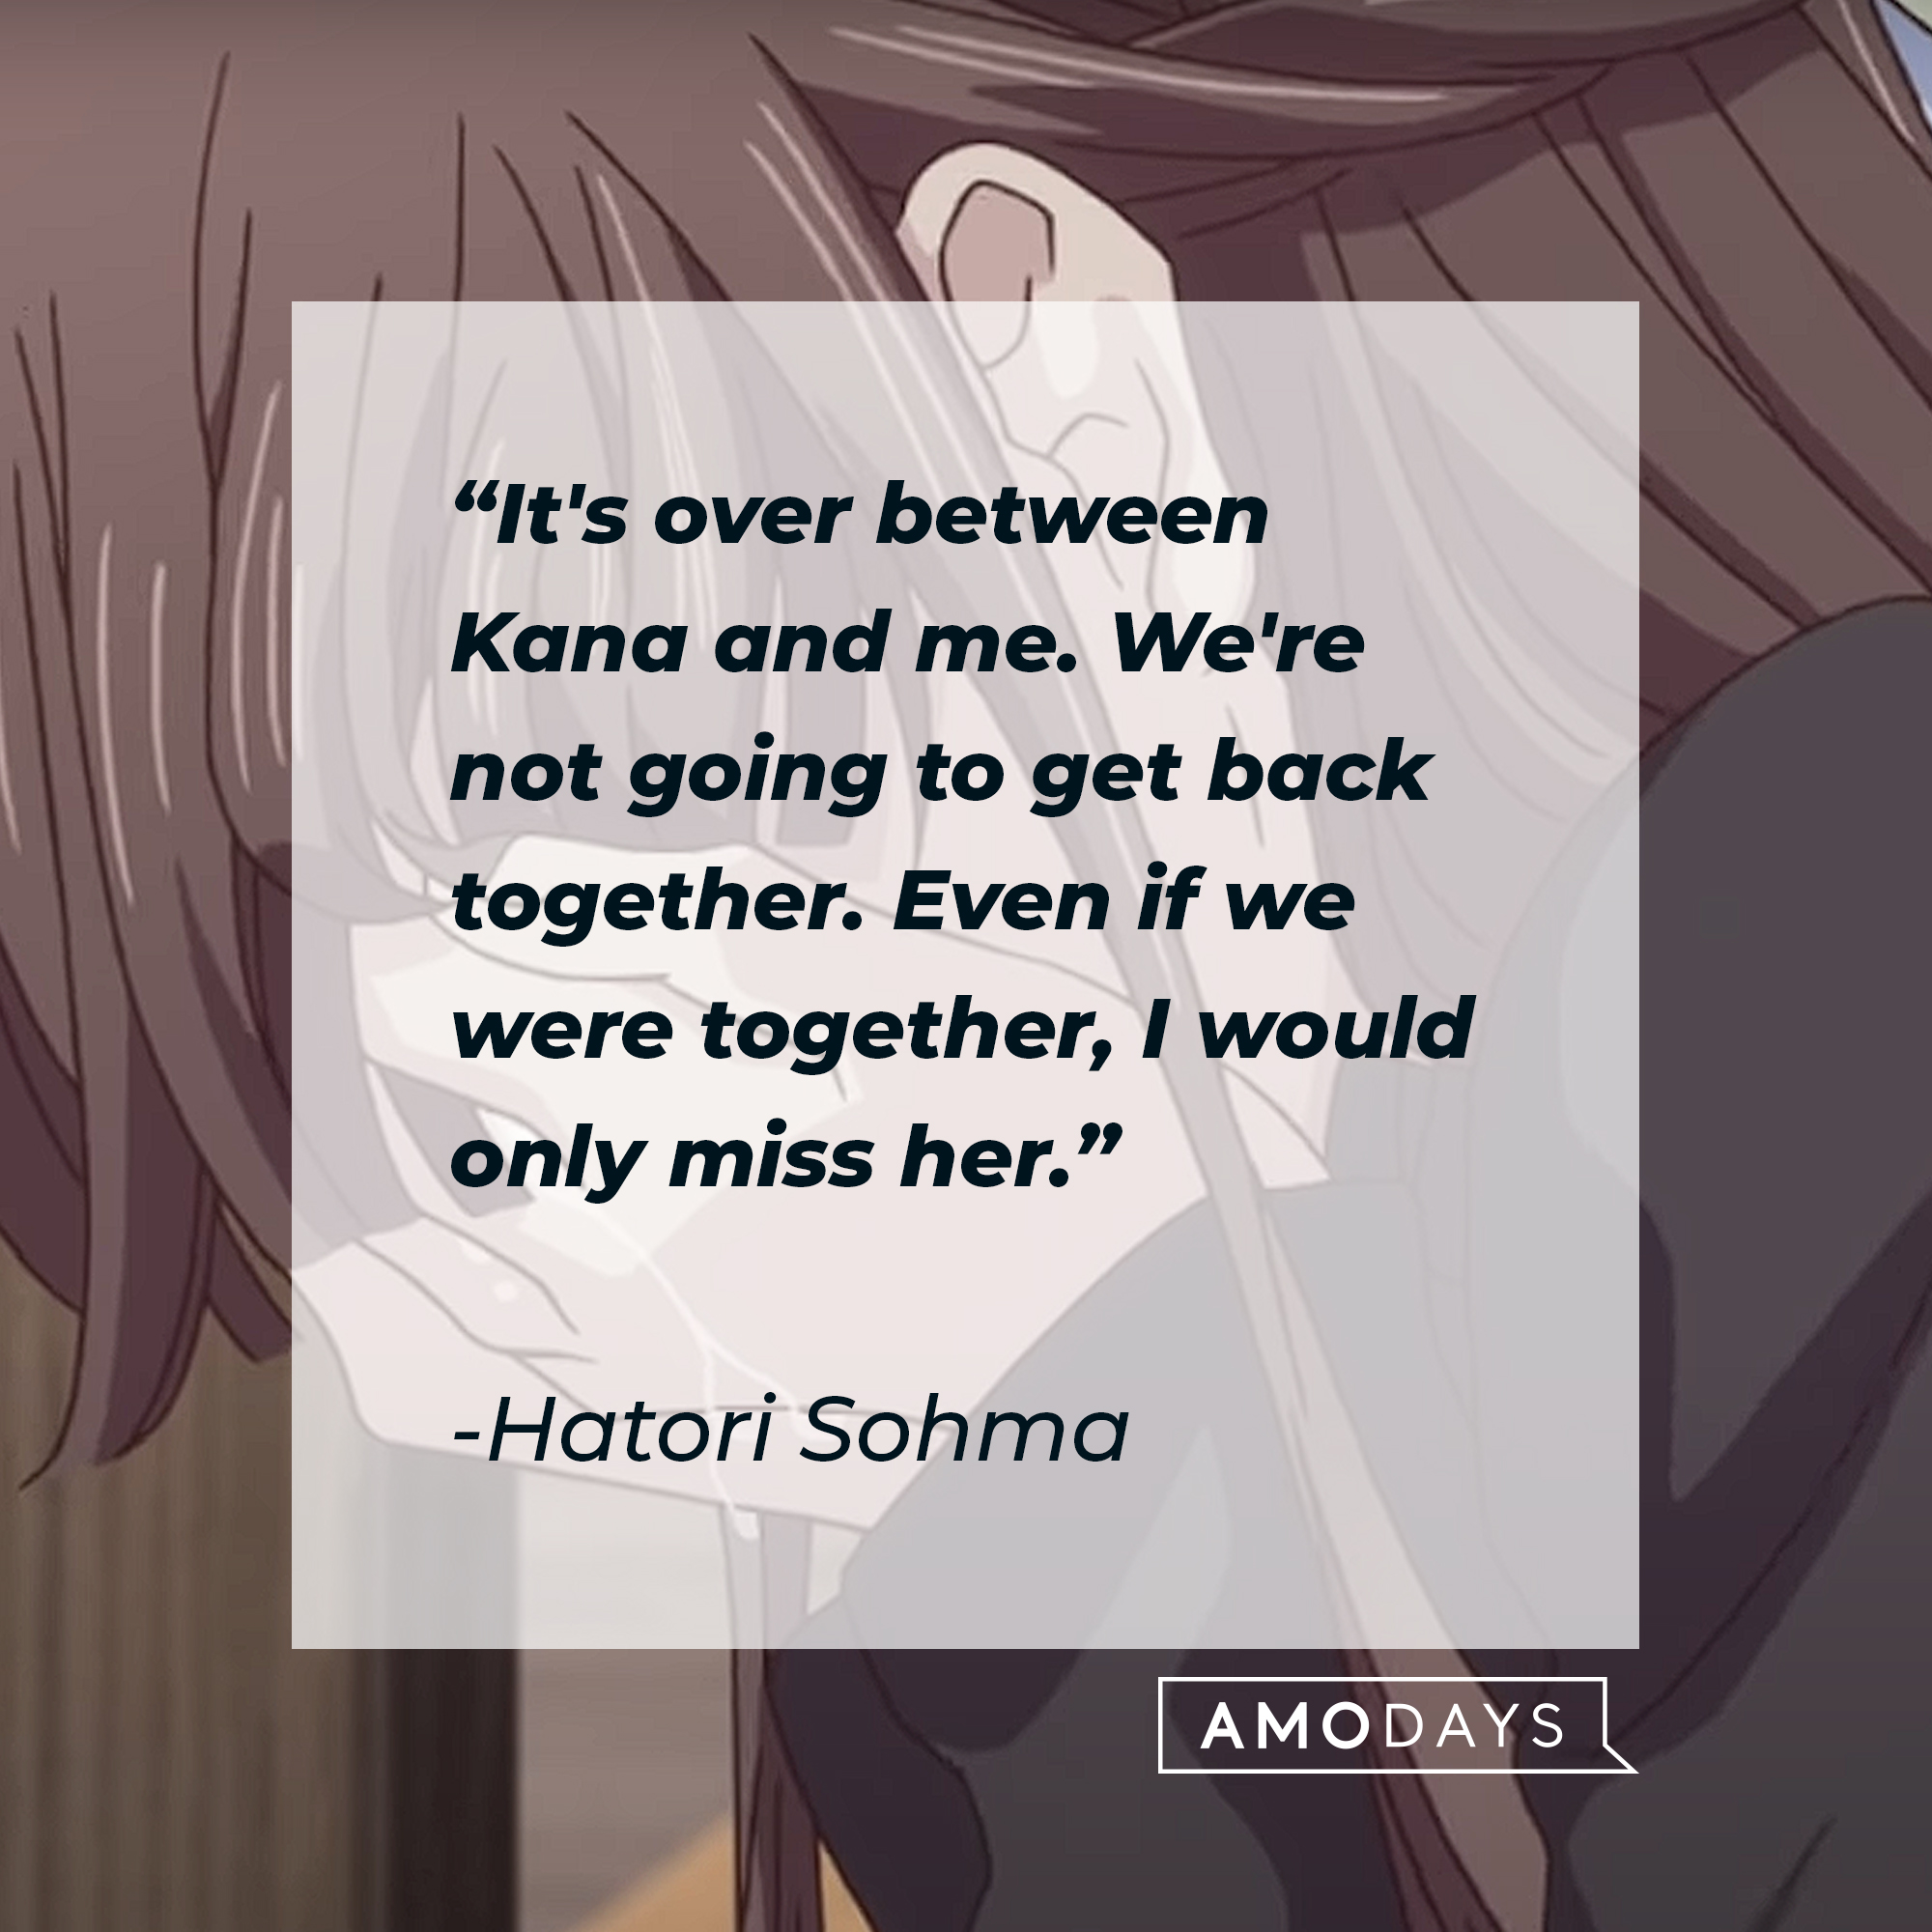 Hatori Sohma's quote: "It's over between Kana and me. We're not going to get back together. Even if we were together, I would only miss her." | Image: AmoDays